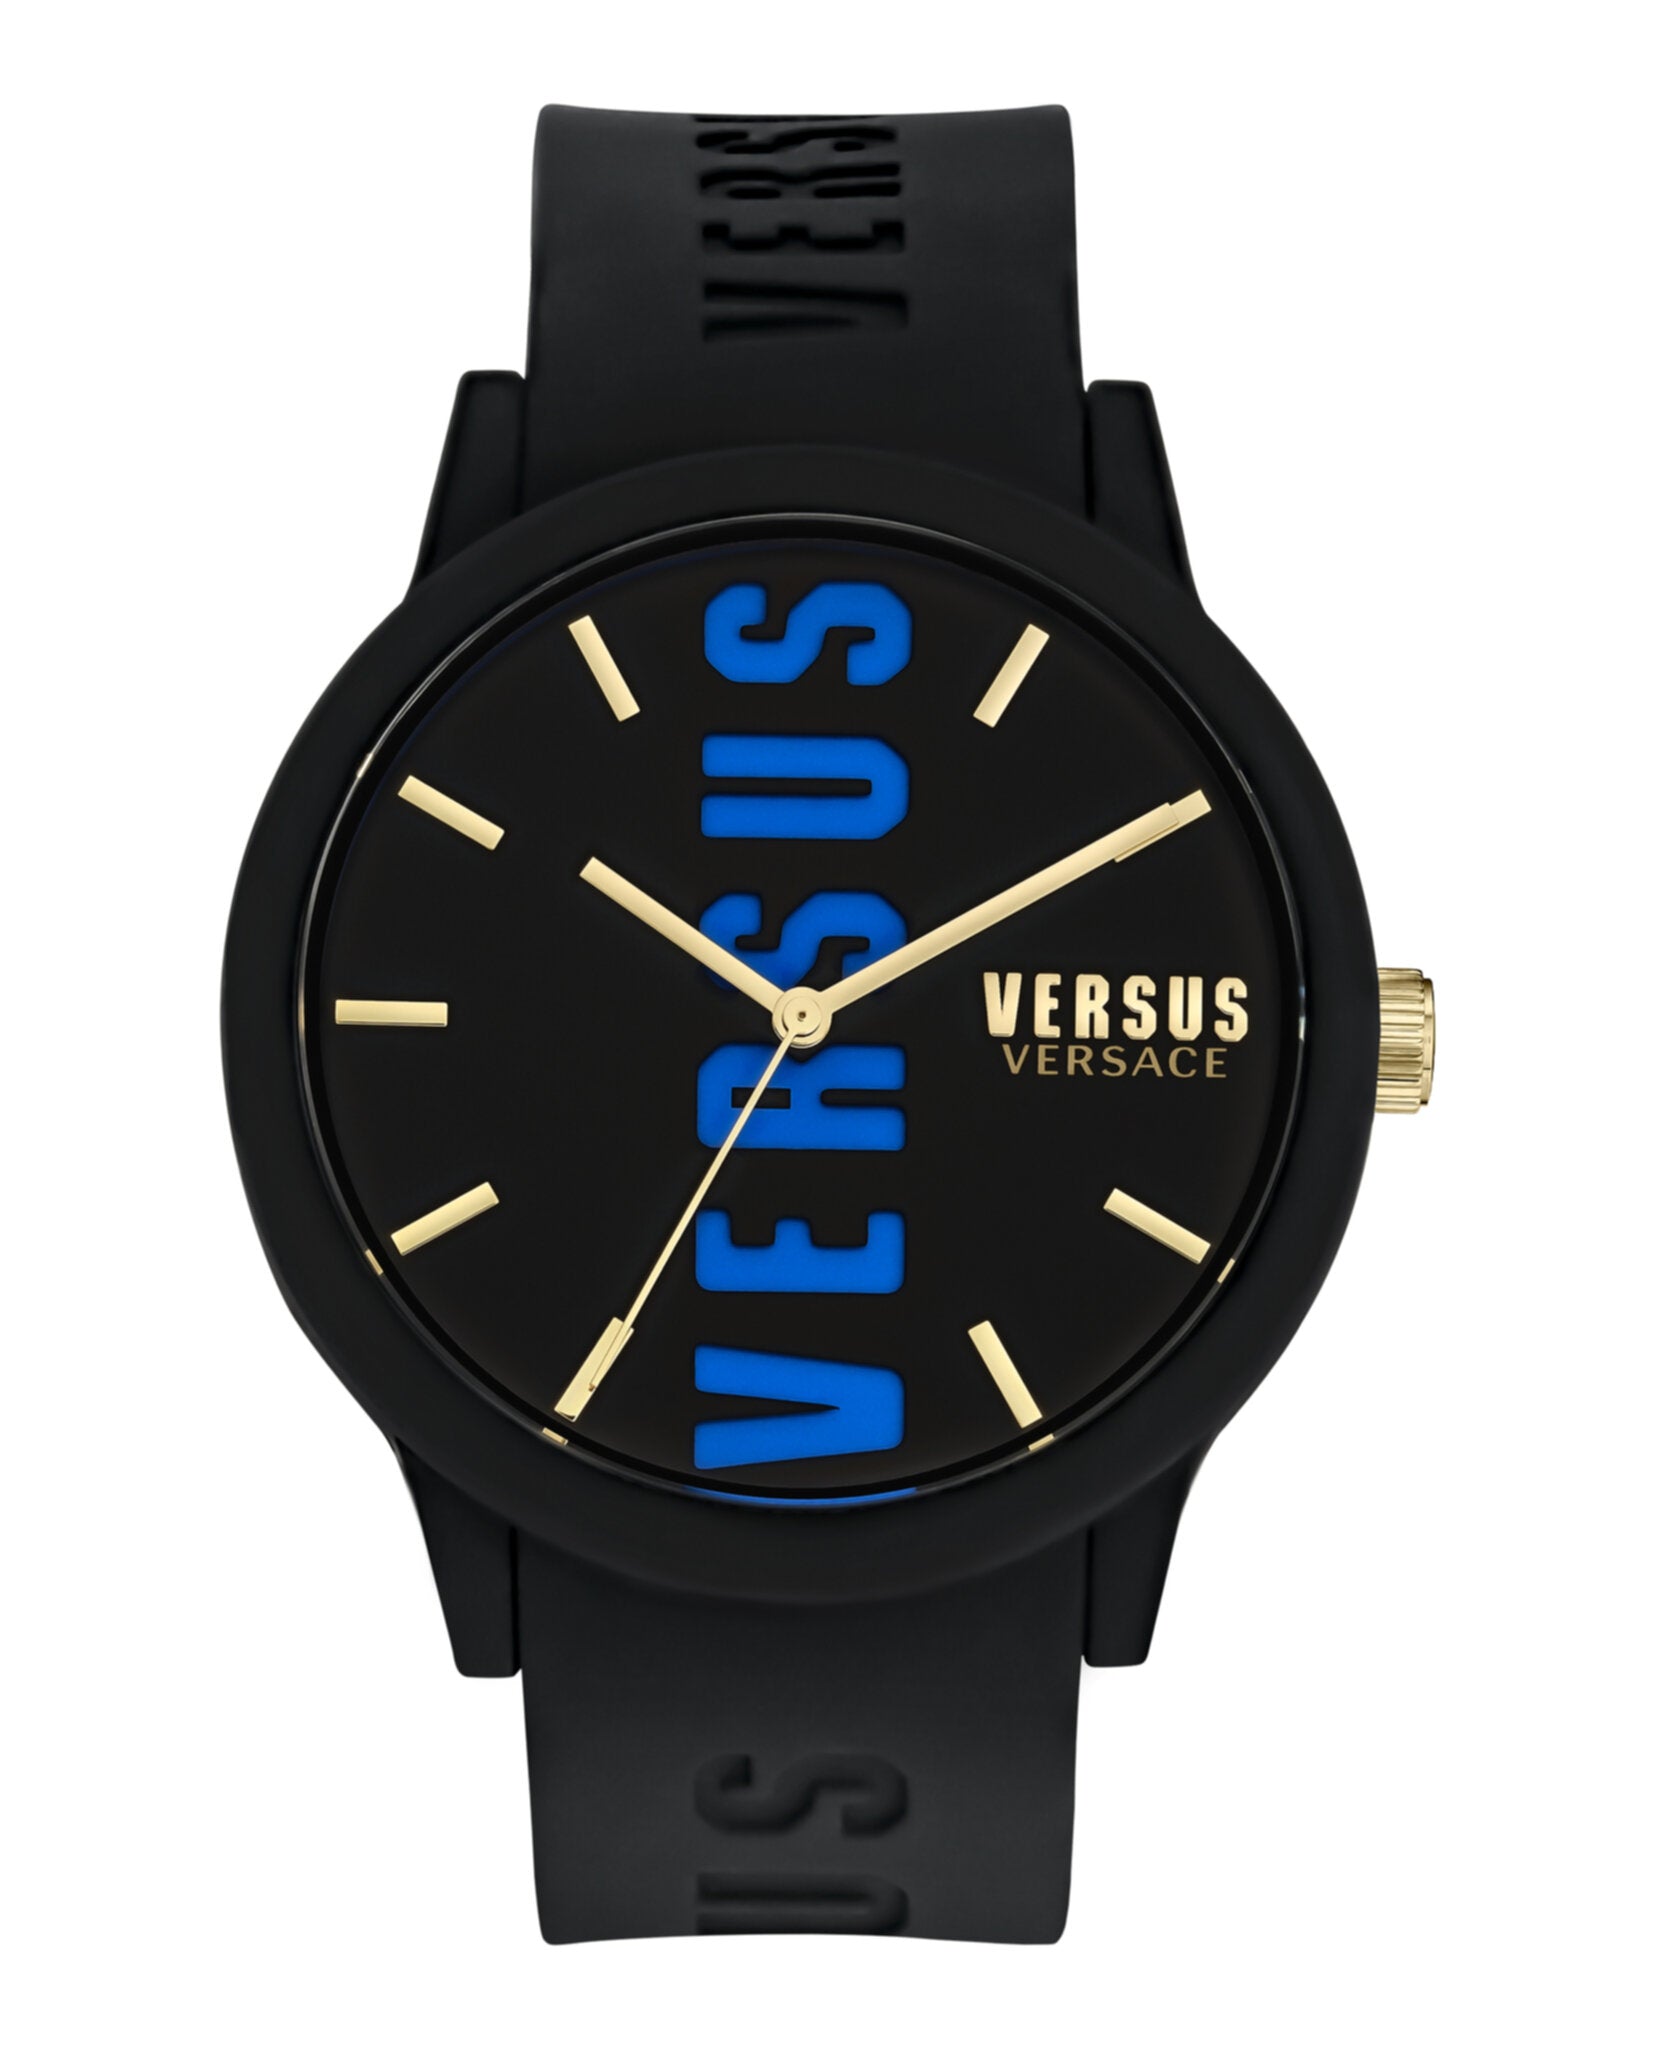 Barbes Silicone Strap Watch